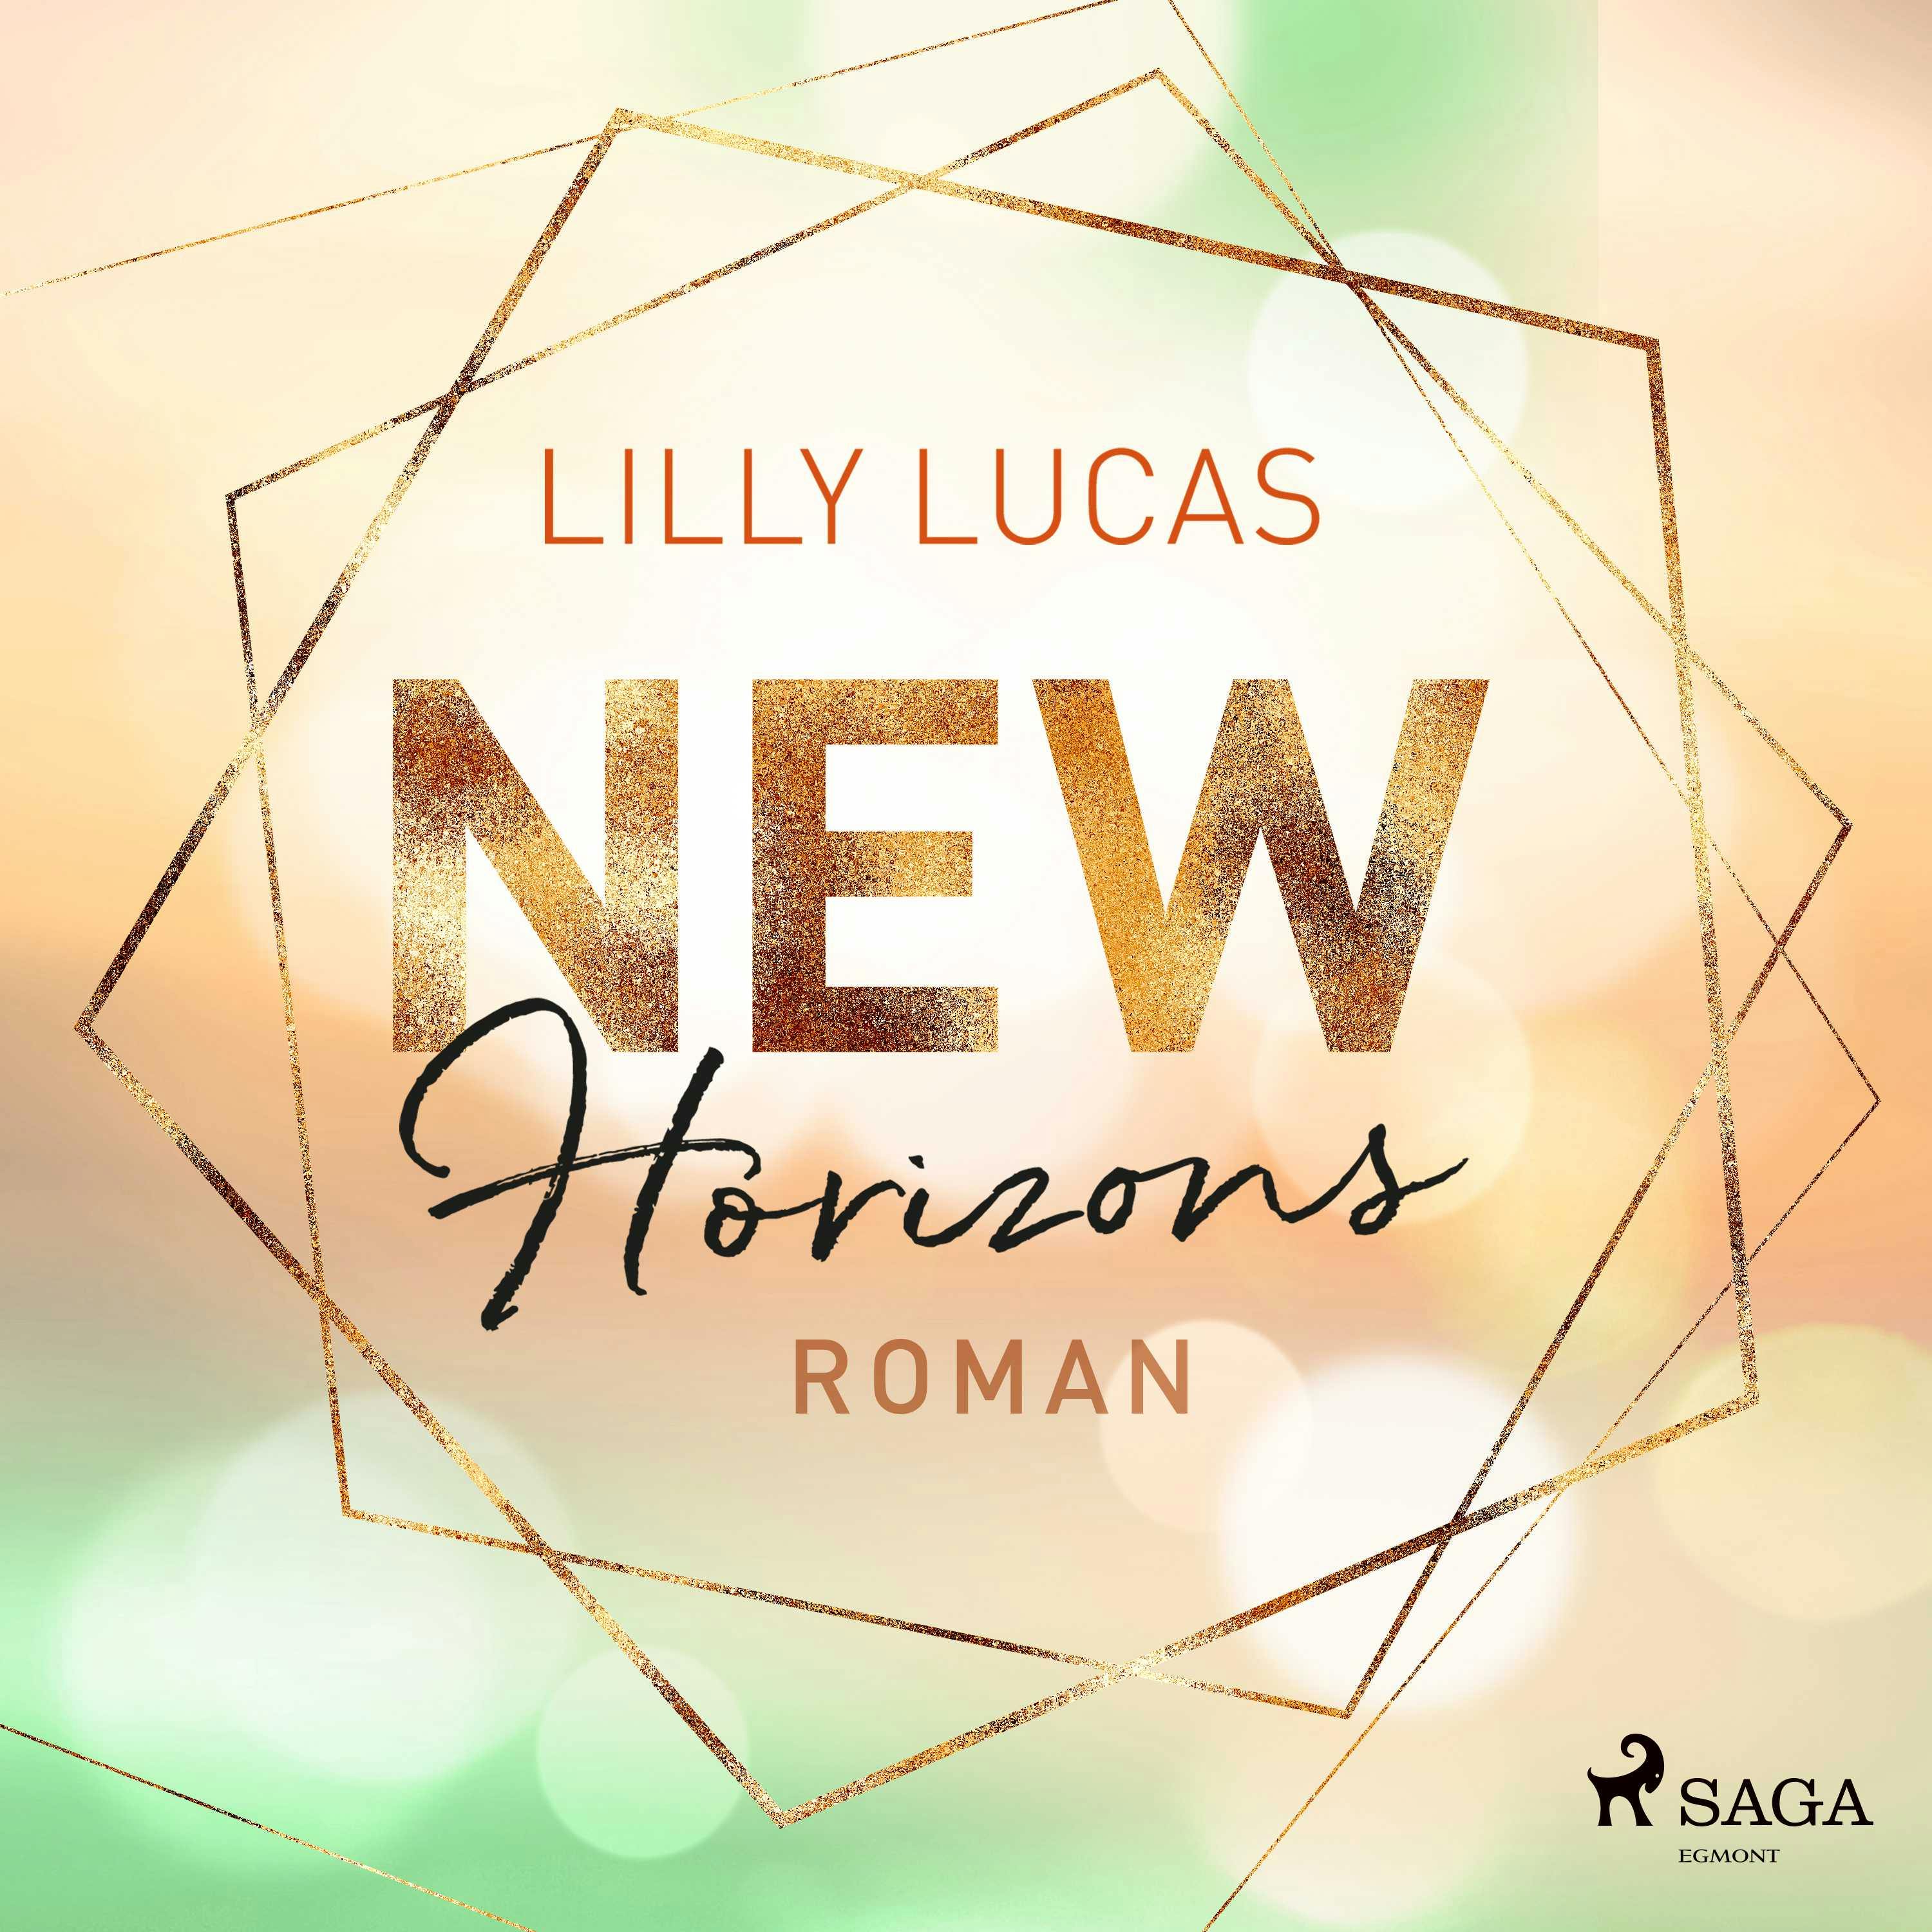 New Horizons: Roman (Green Valley Love 4) - undefined